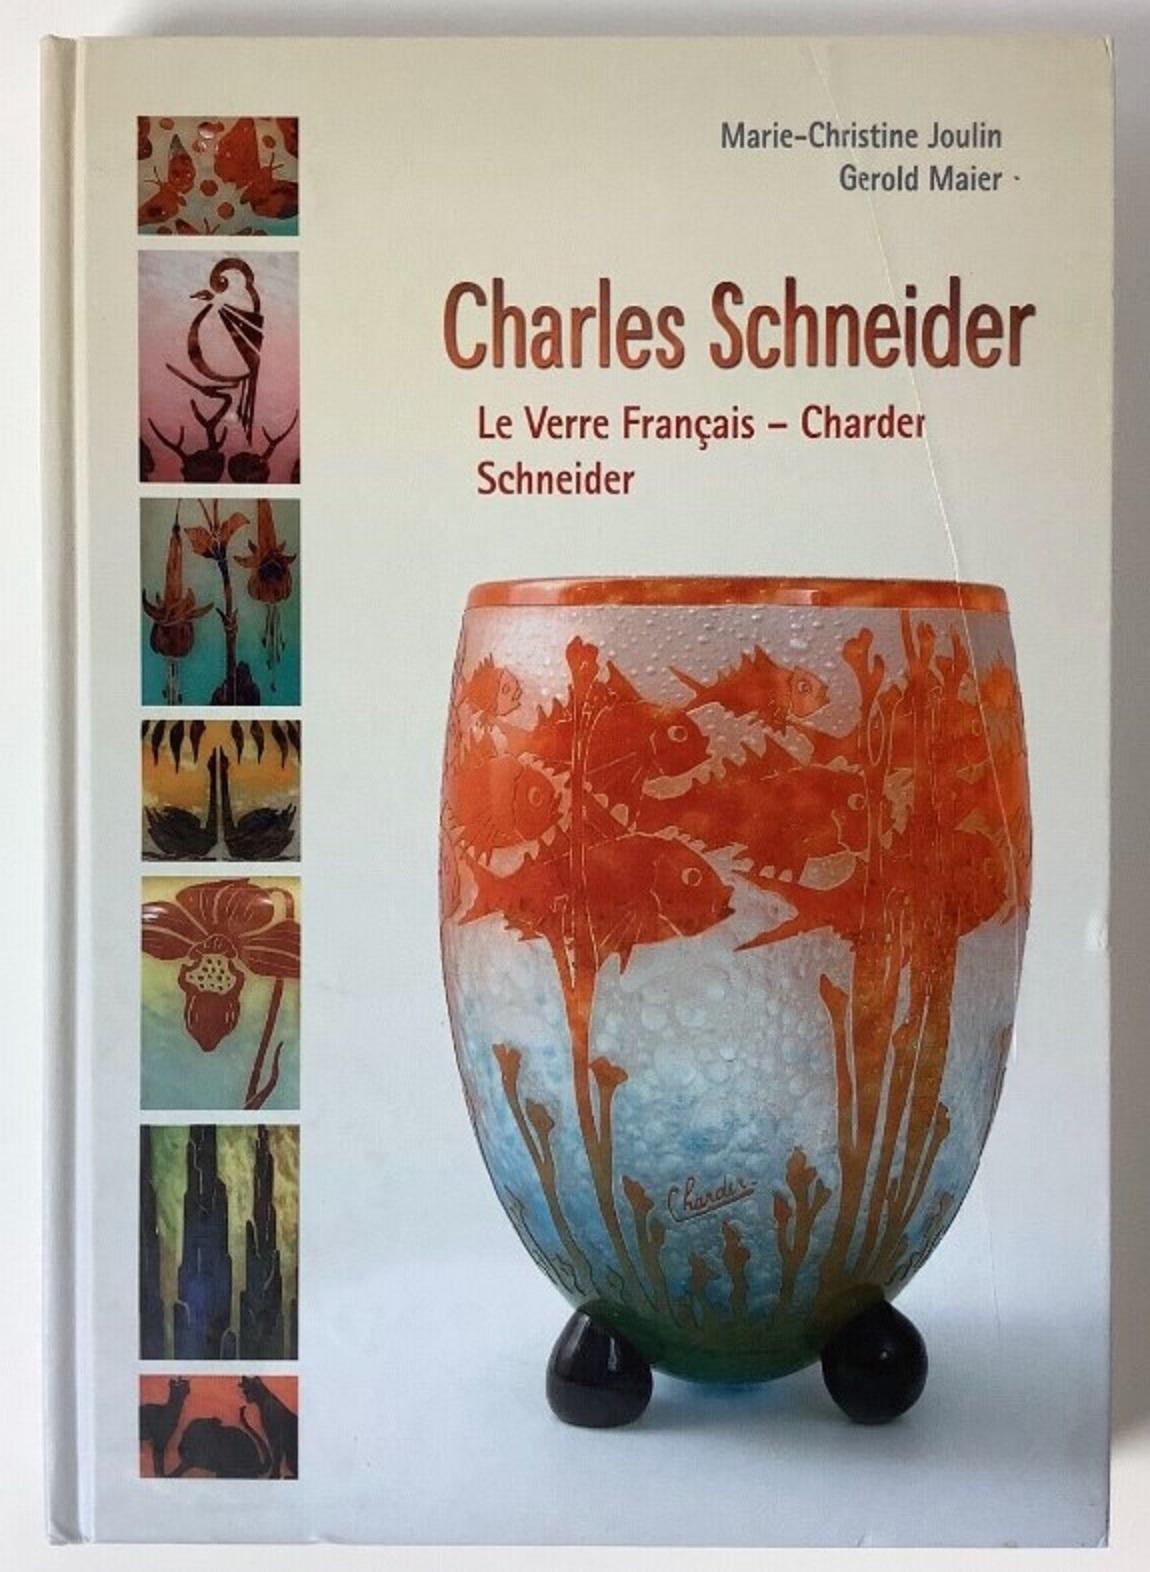 Vase Le Verre Francais 
acid worked
Le Verre cameo glass was a separate line of art glass designed by Charles Schneider. Its production was made at the same time as the Schneider designed glasses 1918 –1933. But from 1919 the two lines were kept